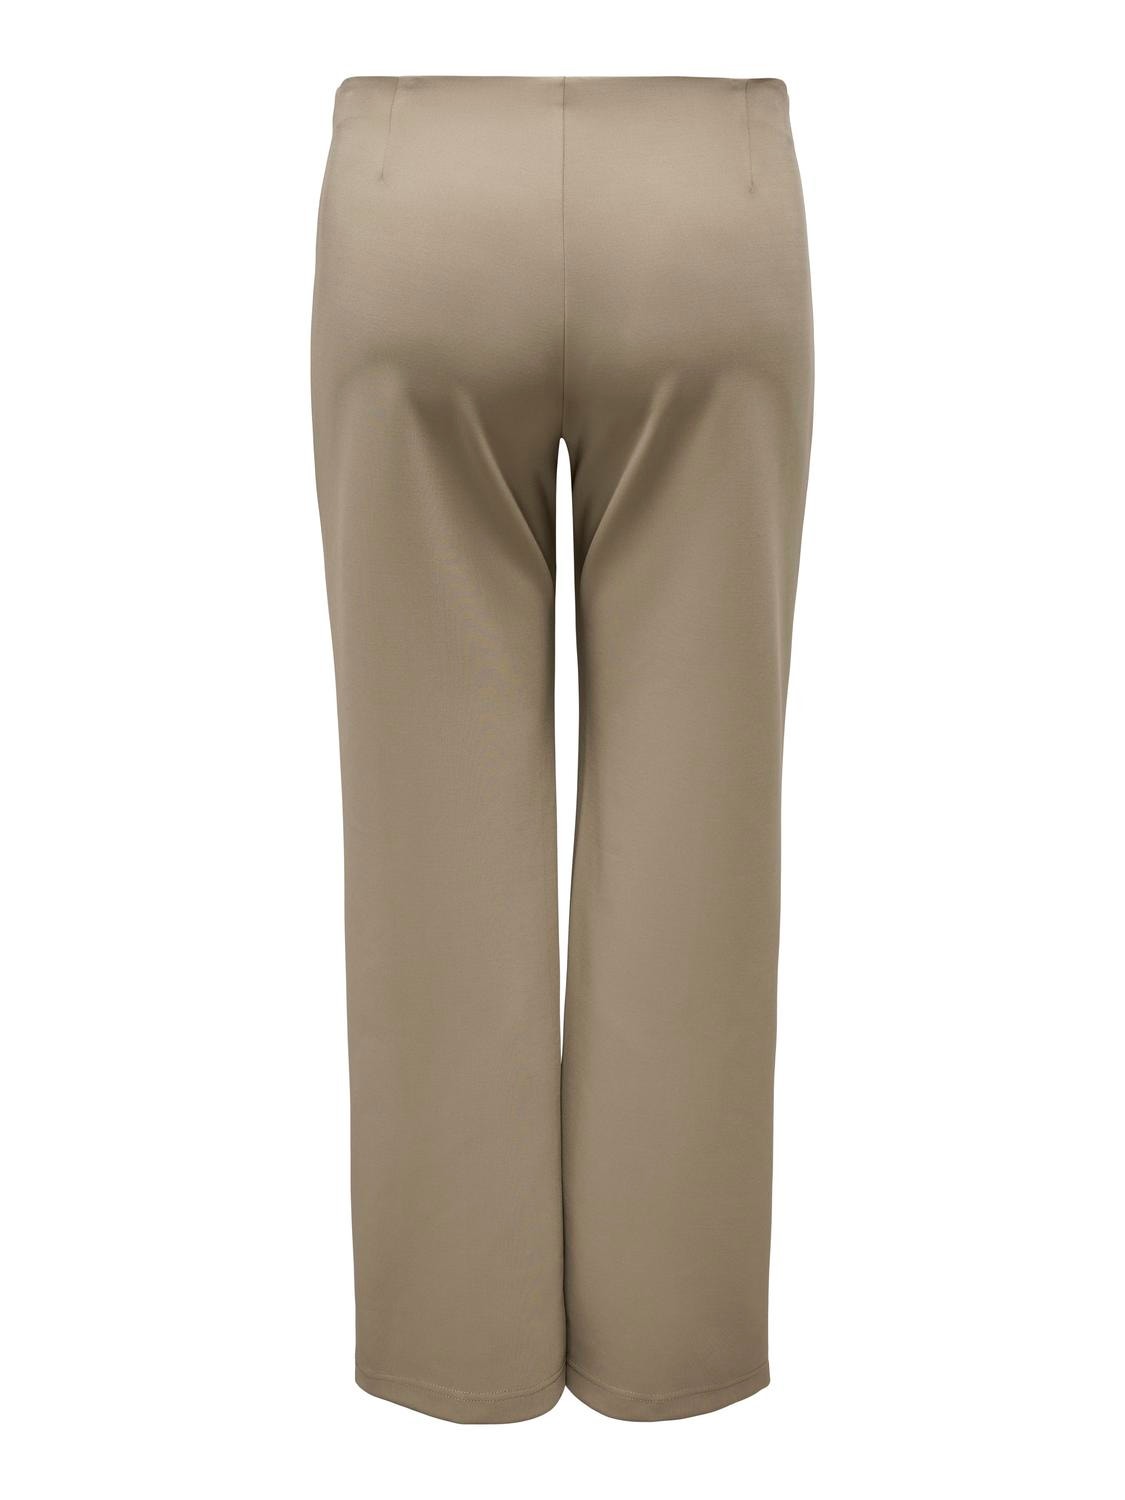 ONLY Straight Fit High waist Curve Trousers -Weathered Teak - 15312009